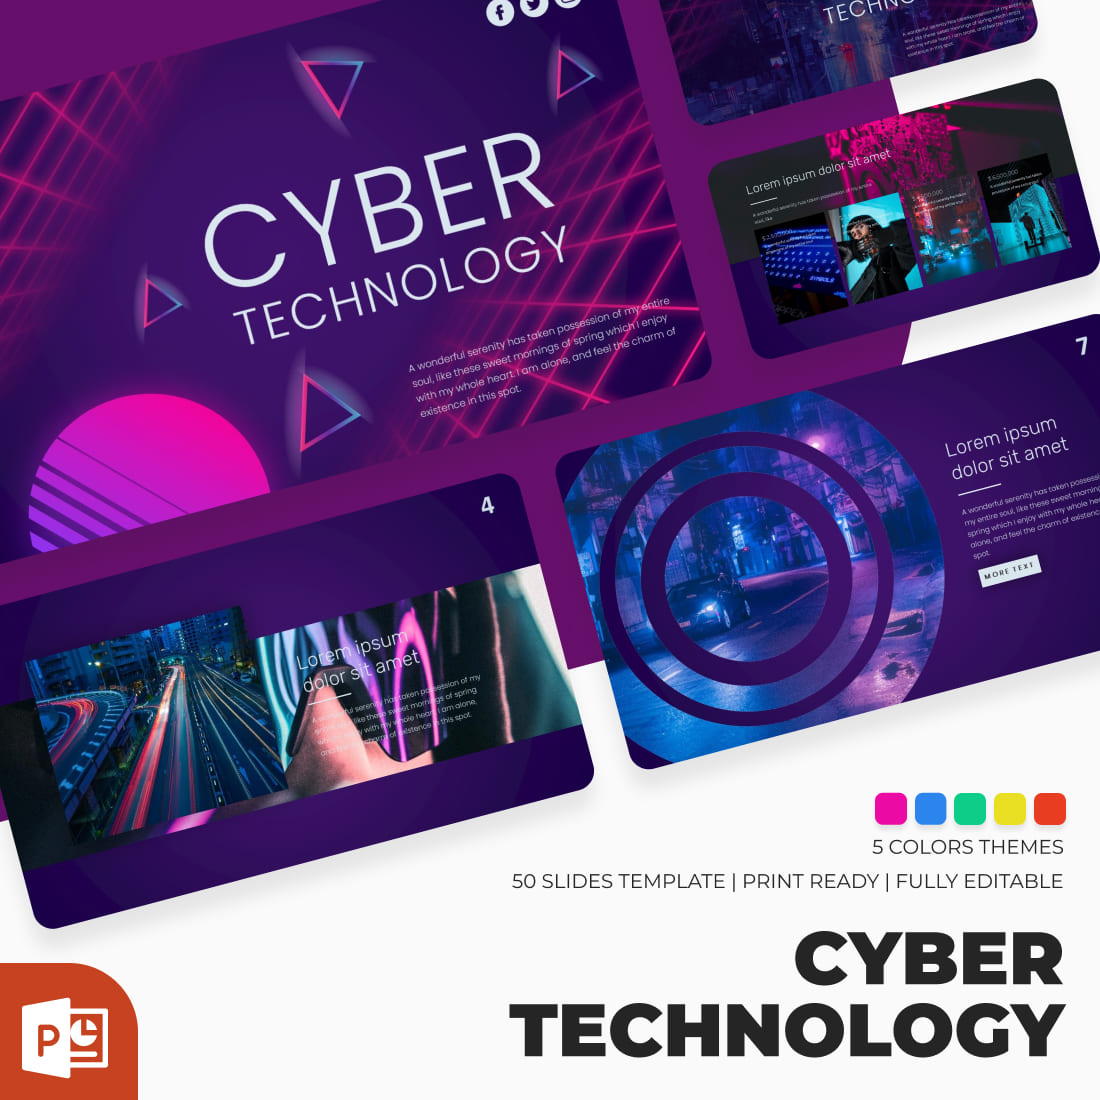 Cyber Technology PowerPoint Template main cover.